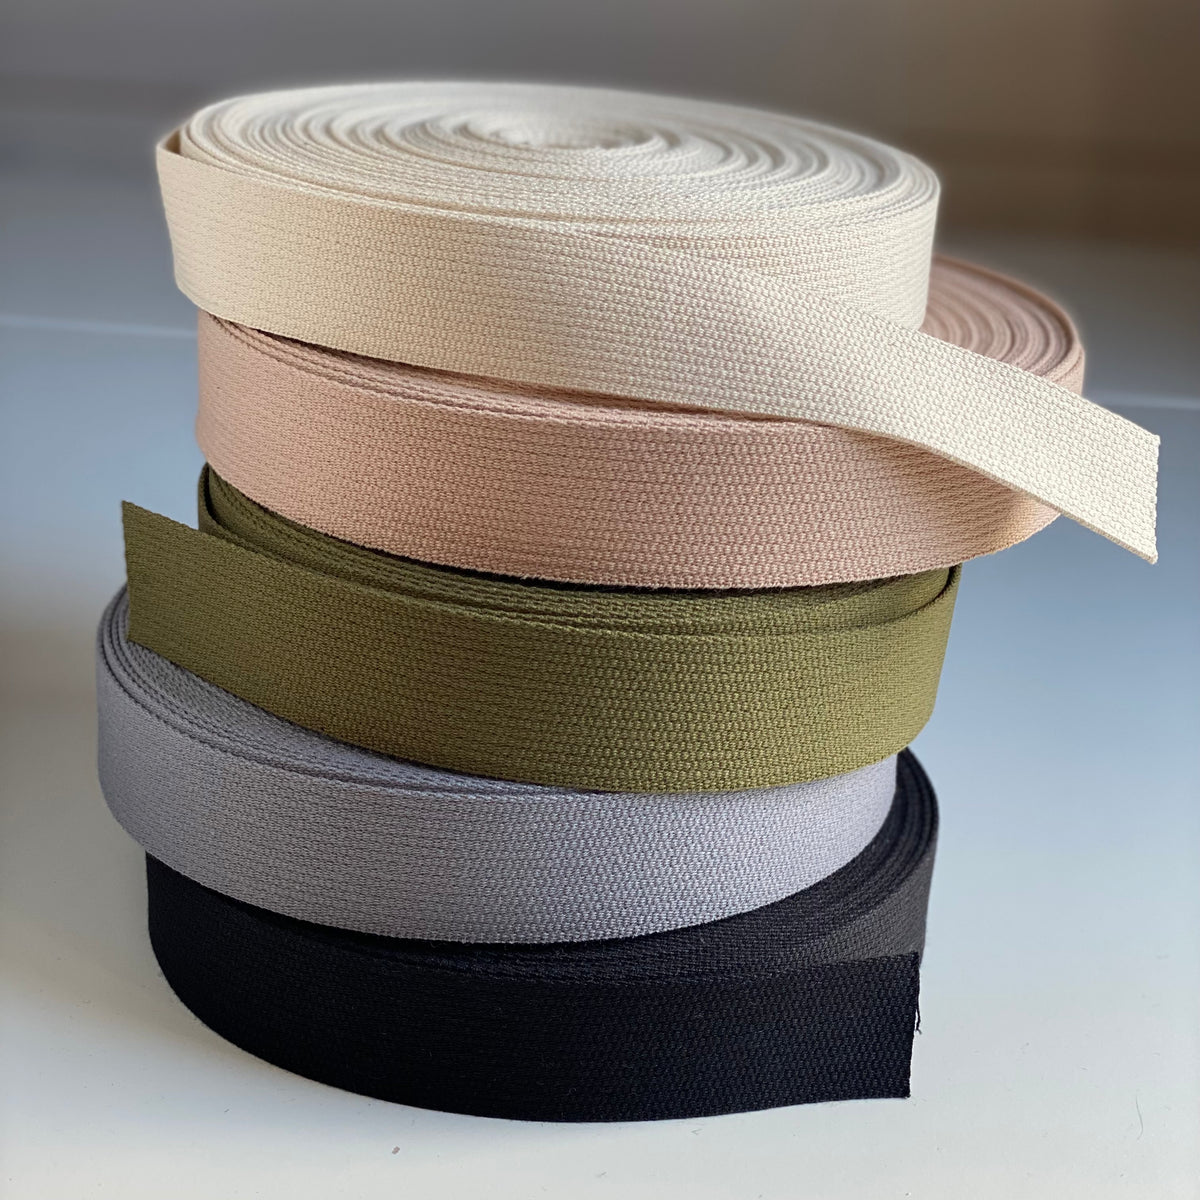 30mm - Bag Cotton Webbing/Strapping - Biscuit Beige